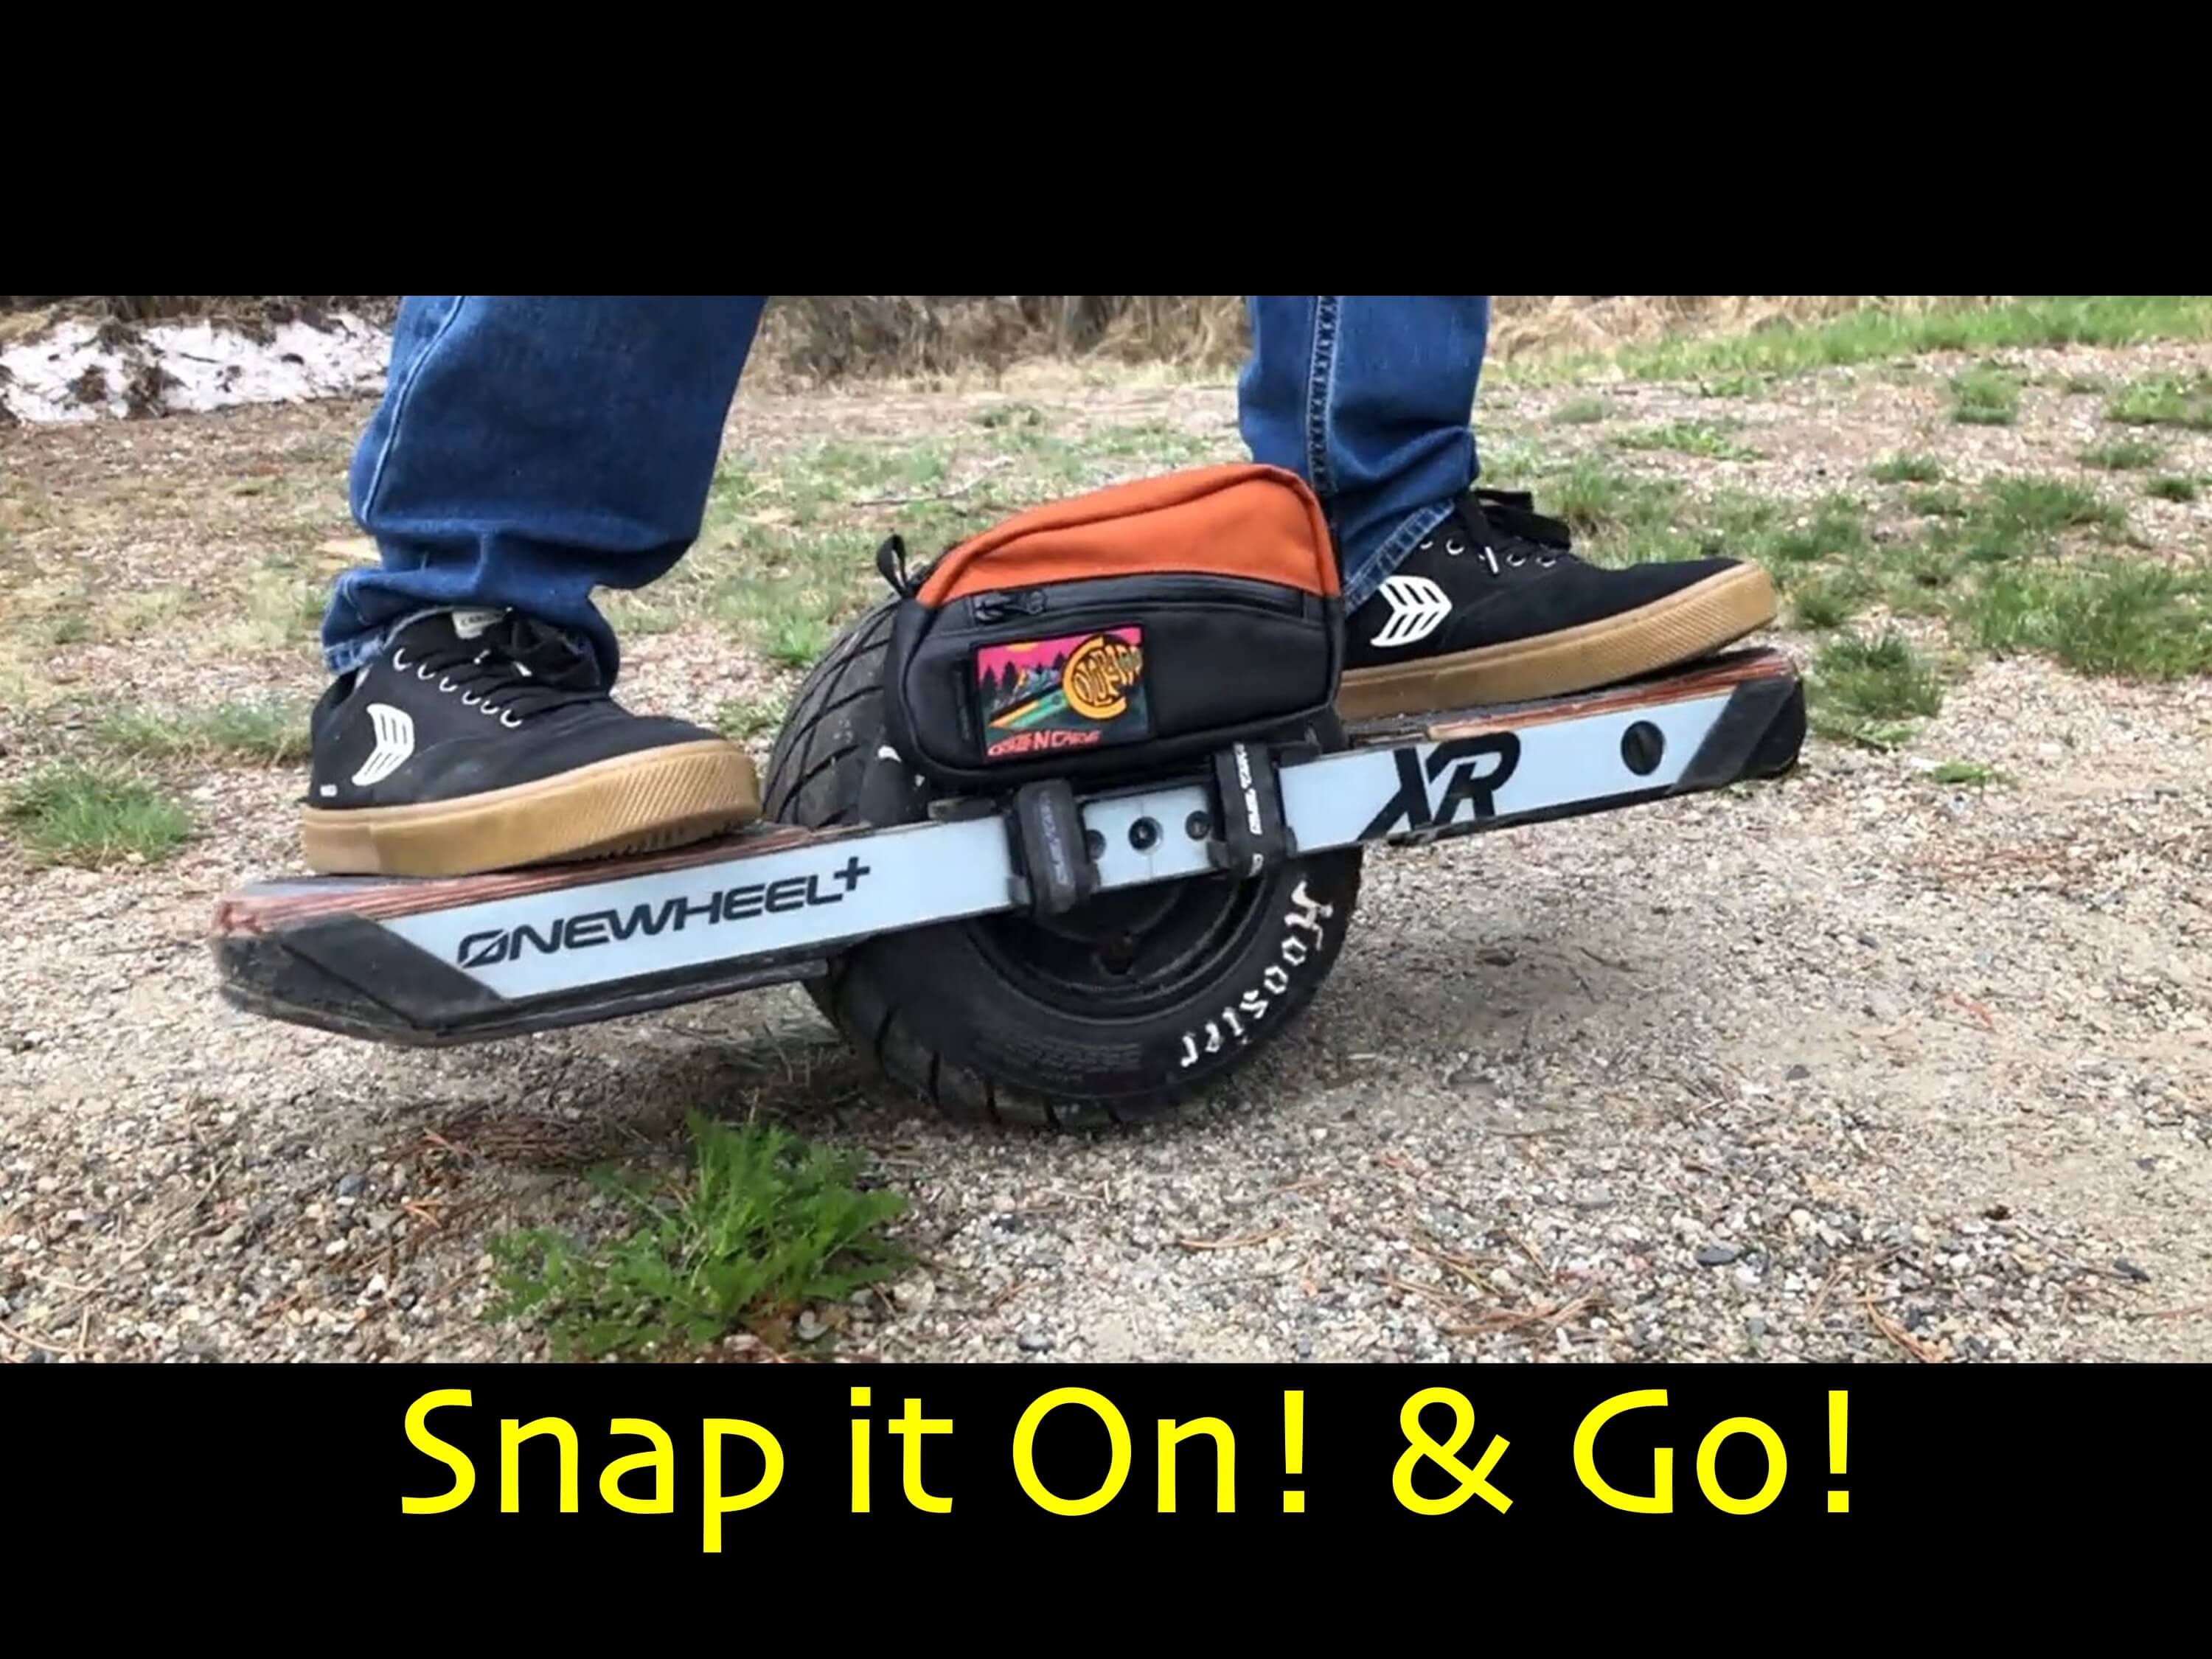 Load video: Onewheel accessories pack snaps onto side of onewheel xr and rider rides away